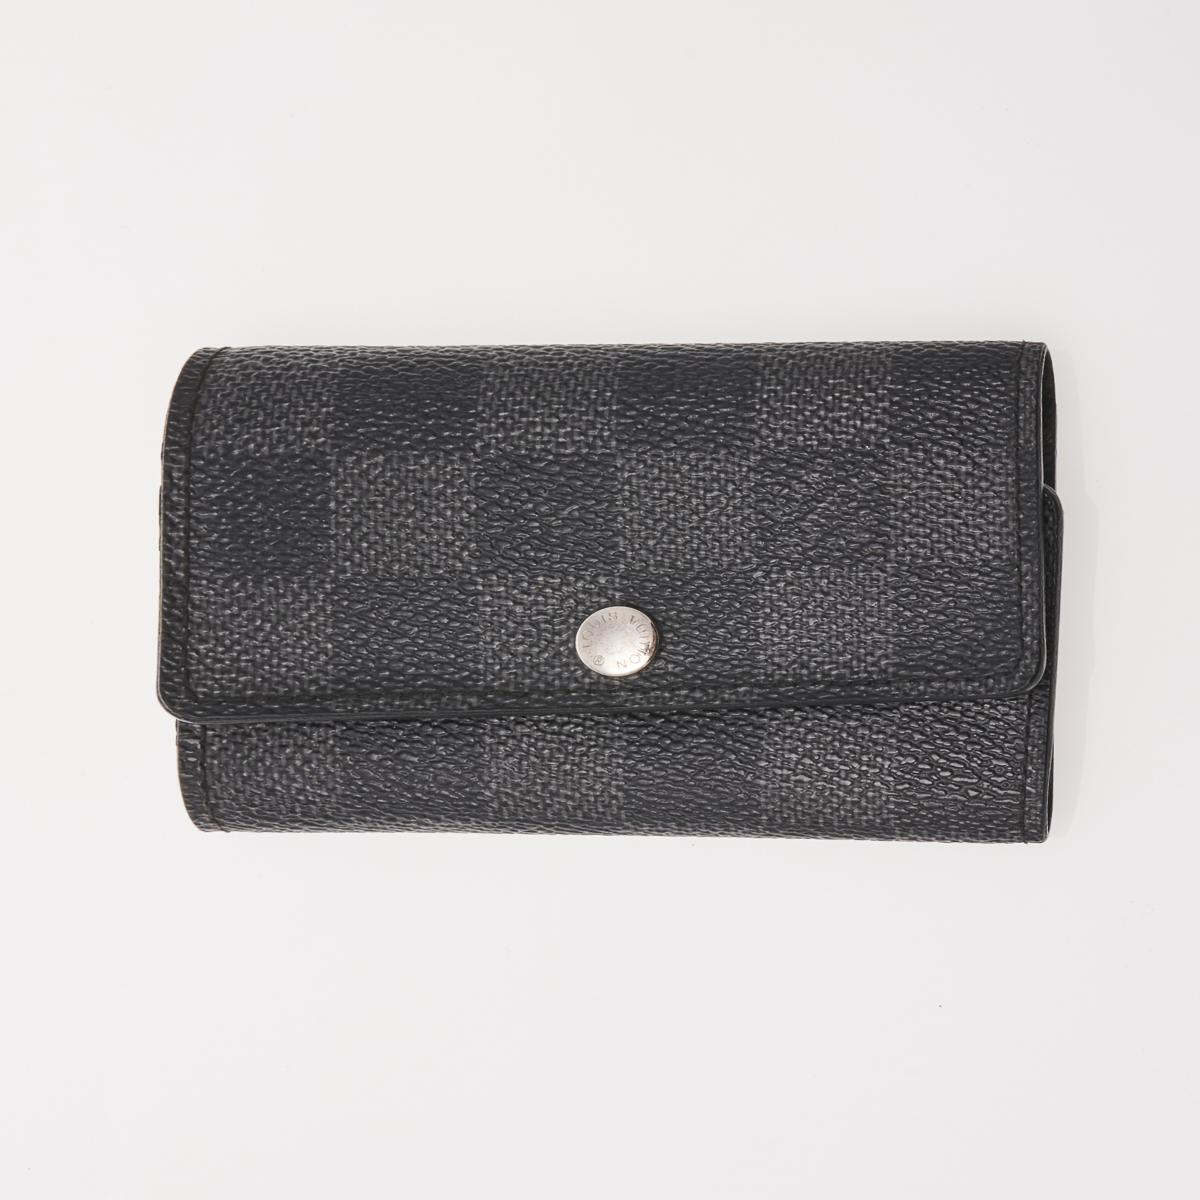 Louis Vuitton Damier Graphite Key and Coin Pouch